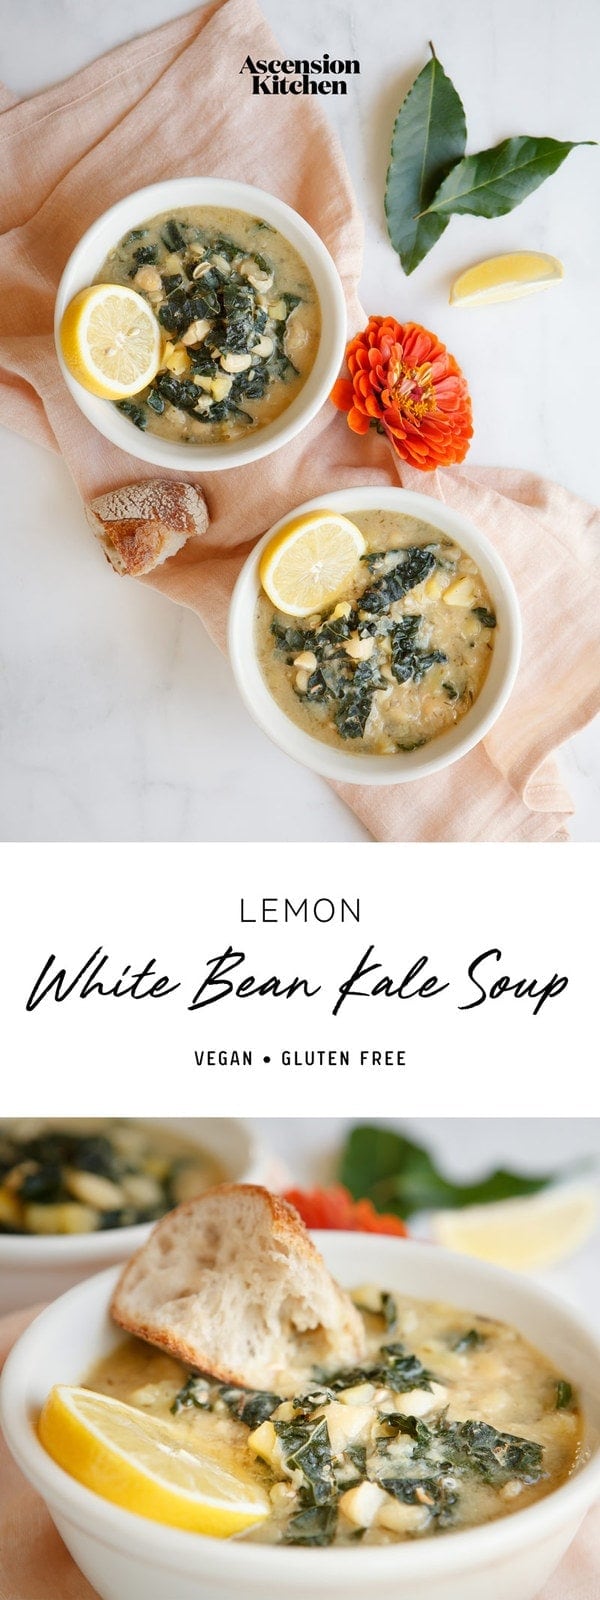 A lemony White Bean Kale Soup – warming, Tuscan style and super satisfying. Vegan and gluten free. #whitebeankalesoup #whitebeankalesoupvegtarian #whitebeankalesoupvegan #whitebeankalesoupwinter #whitebeankalesouphealthy #whitebeankalesoupcrockpot #whitebeankalesouptuscan #whitebeankalesoupglutenfree #whitebeansoup #whitebeansoupvegetarian #whitebeansoupvegan #whitebeansouptuscan #whitebeansoupeasy #AscensionKitchen // Pin to your own inspiration board! //